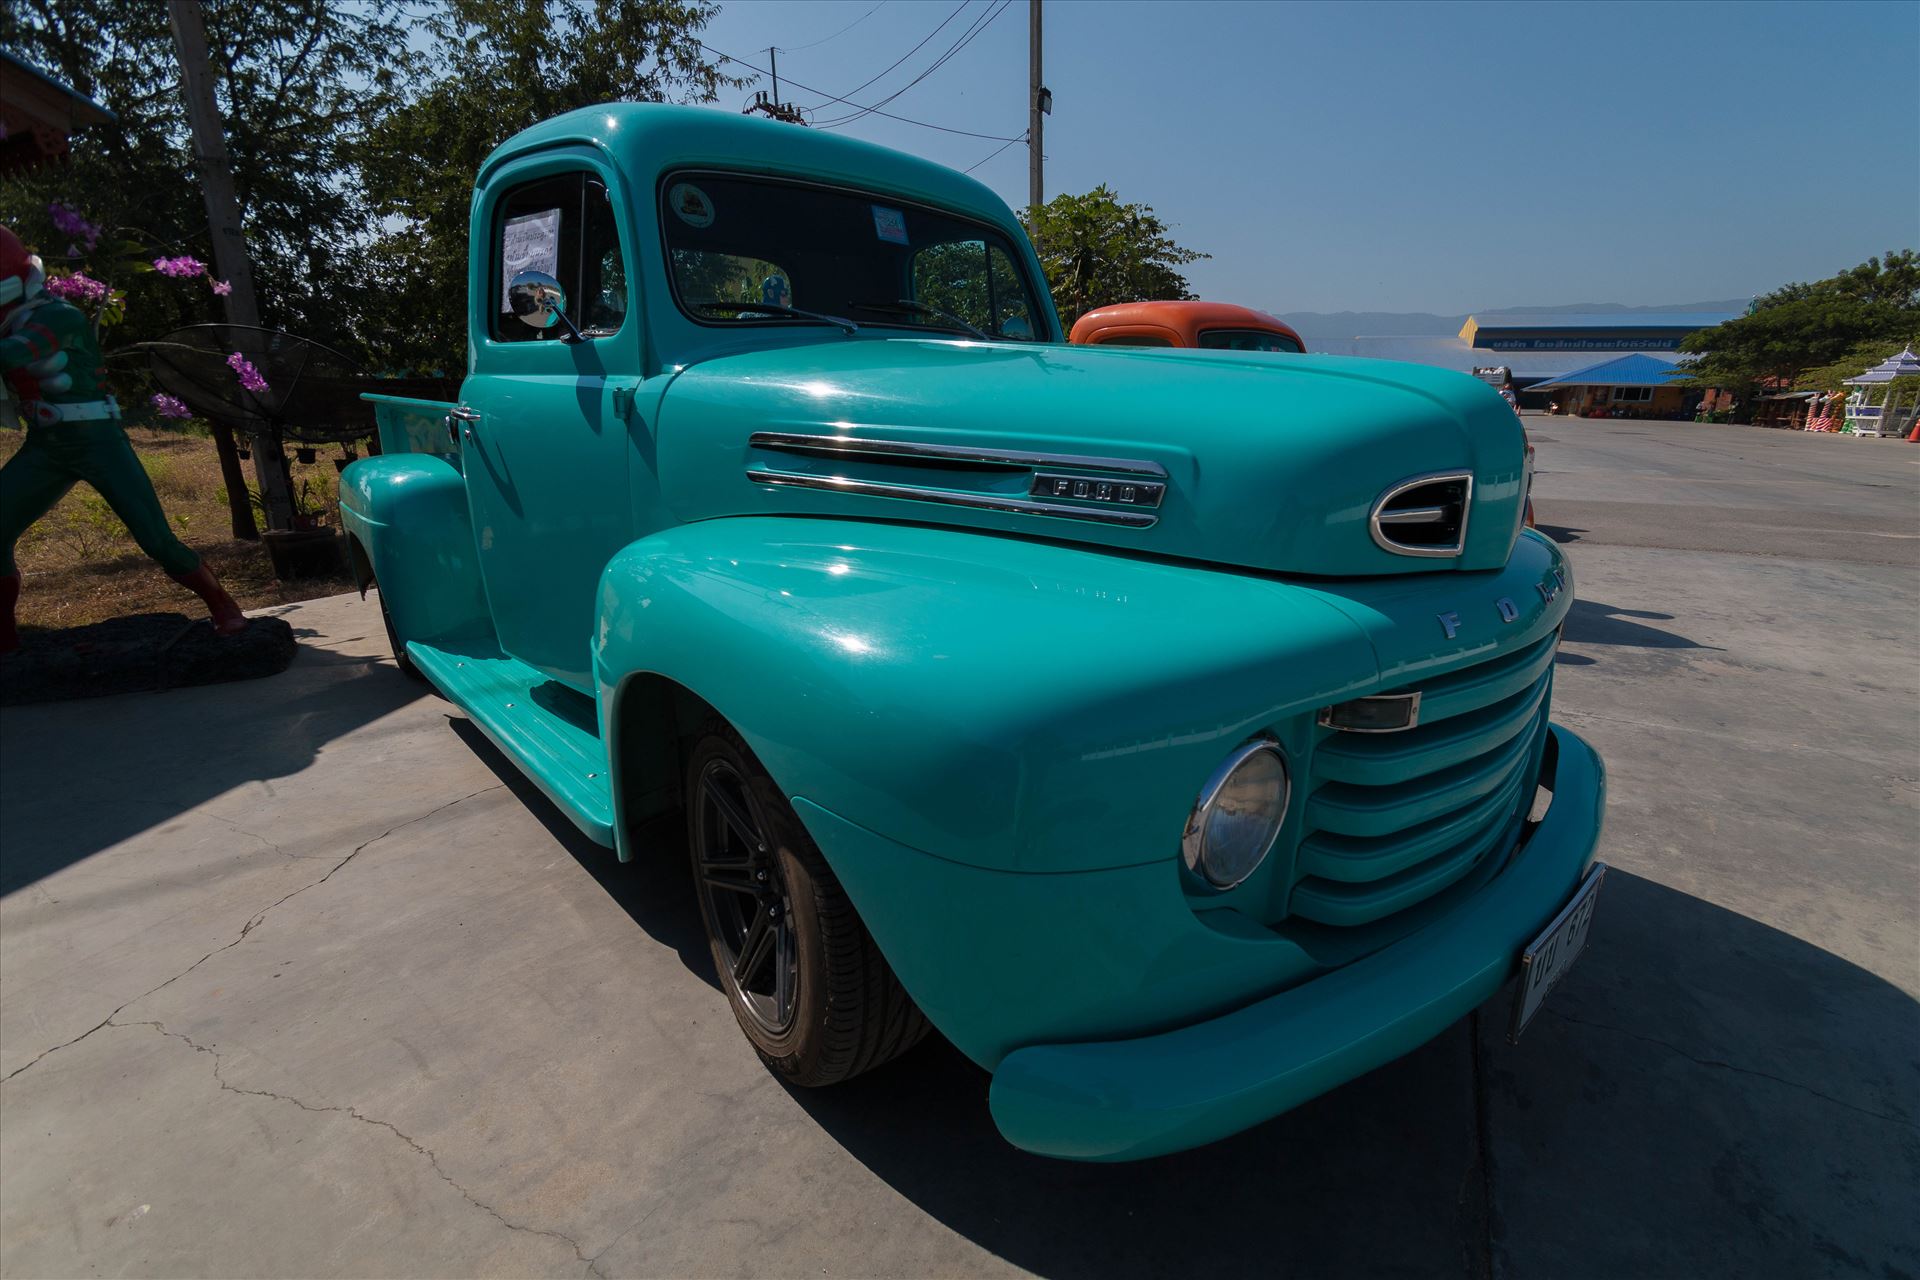 1948 Ford pickup -  by AnnetteJohnsonPhotography